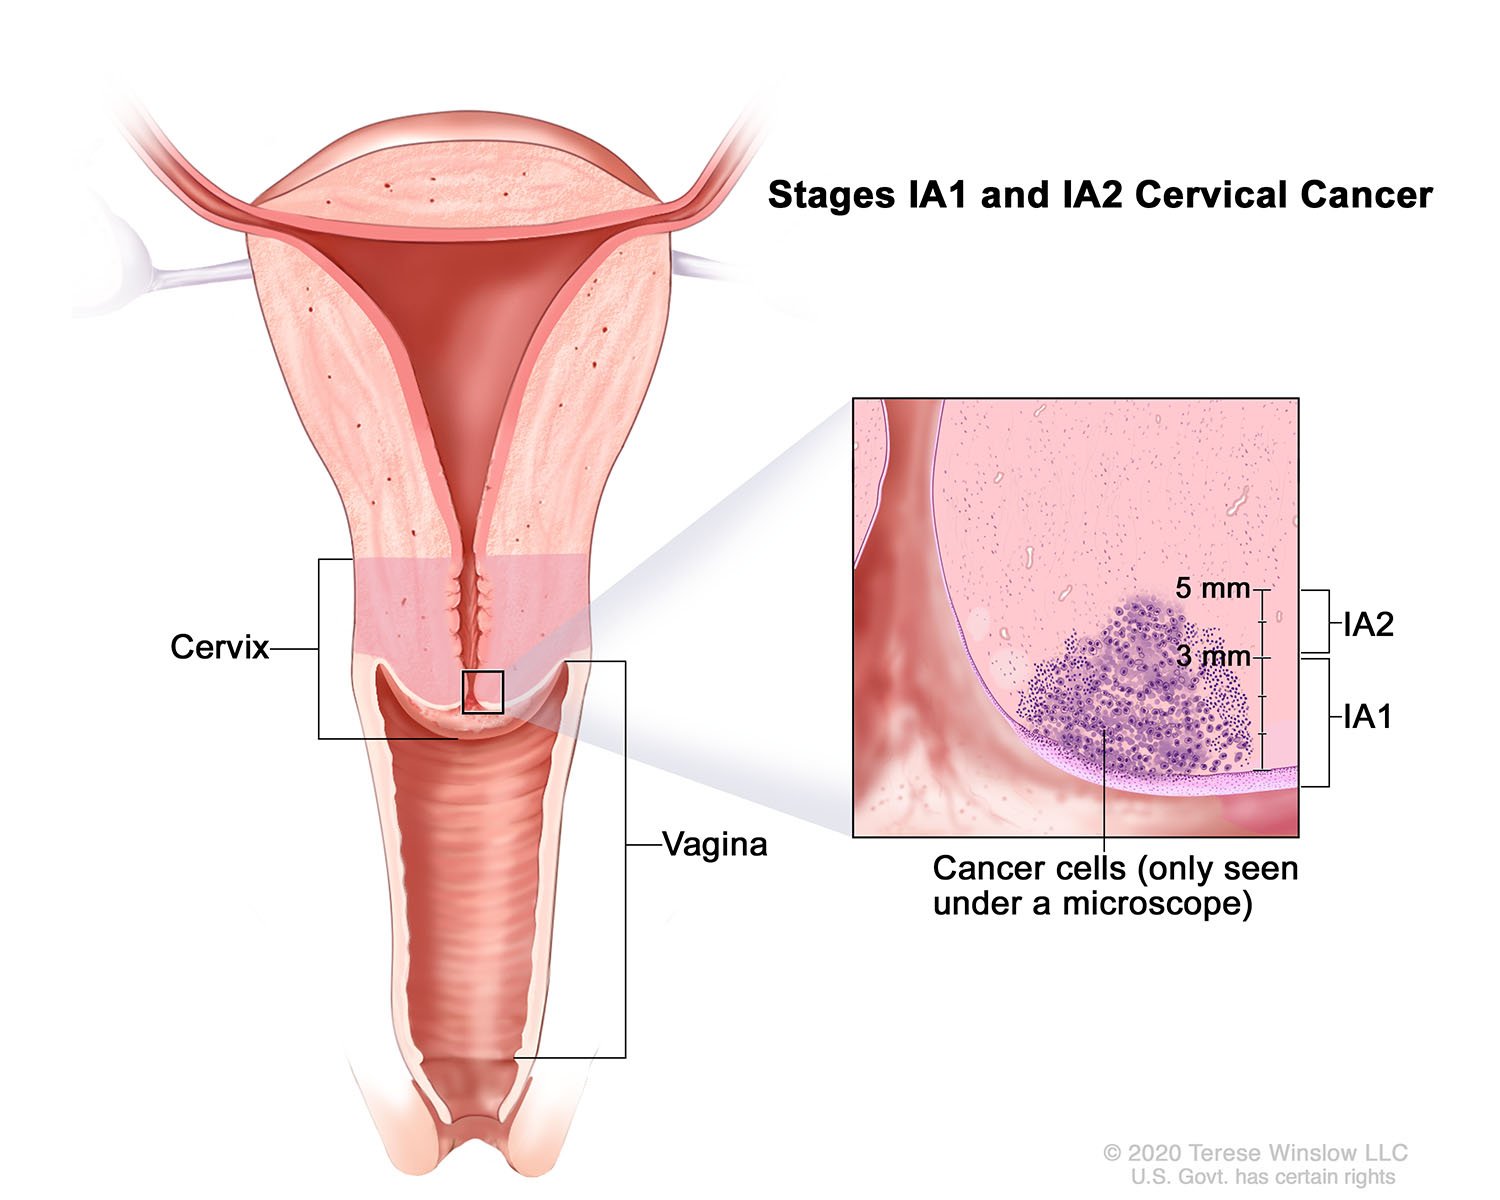 Stages IA1 and IA2 Cervical Cancer